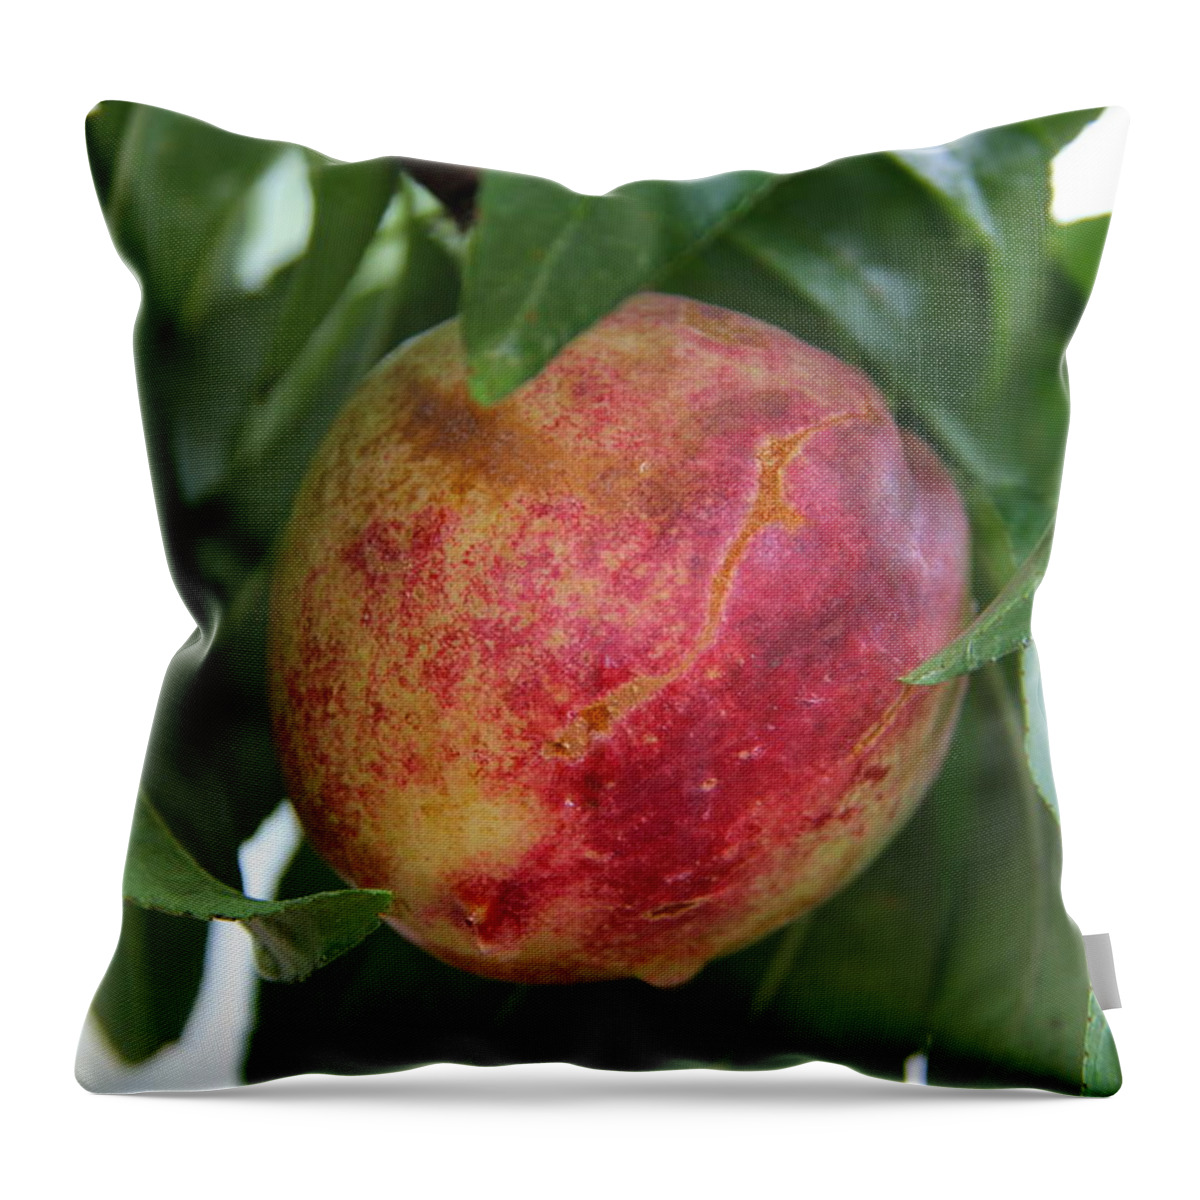 Pluot Throw Pillow featuring the photograph Sunset Fruit by Suzanne Oesterling